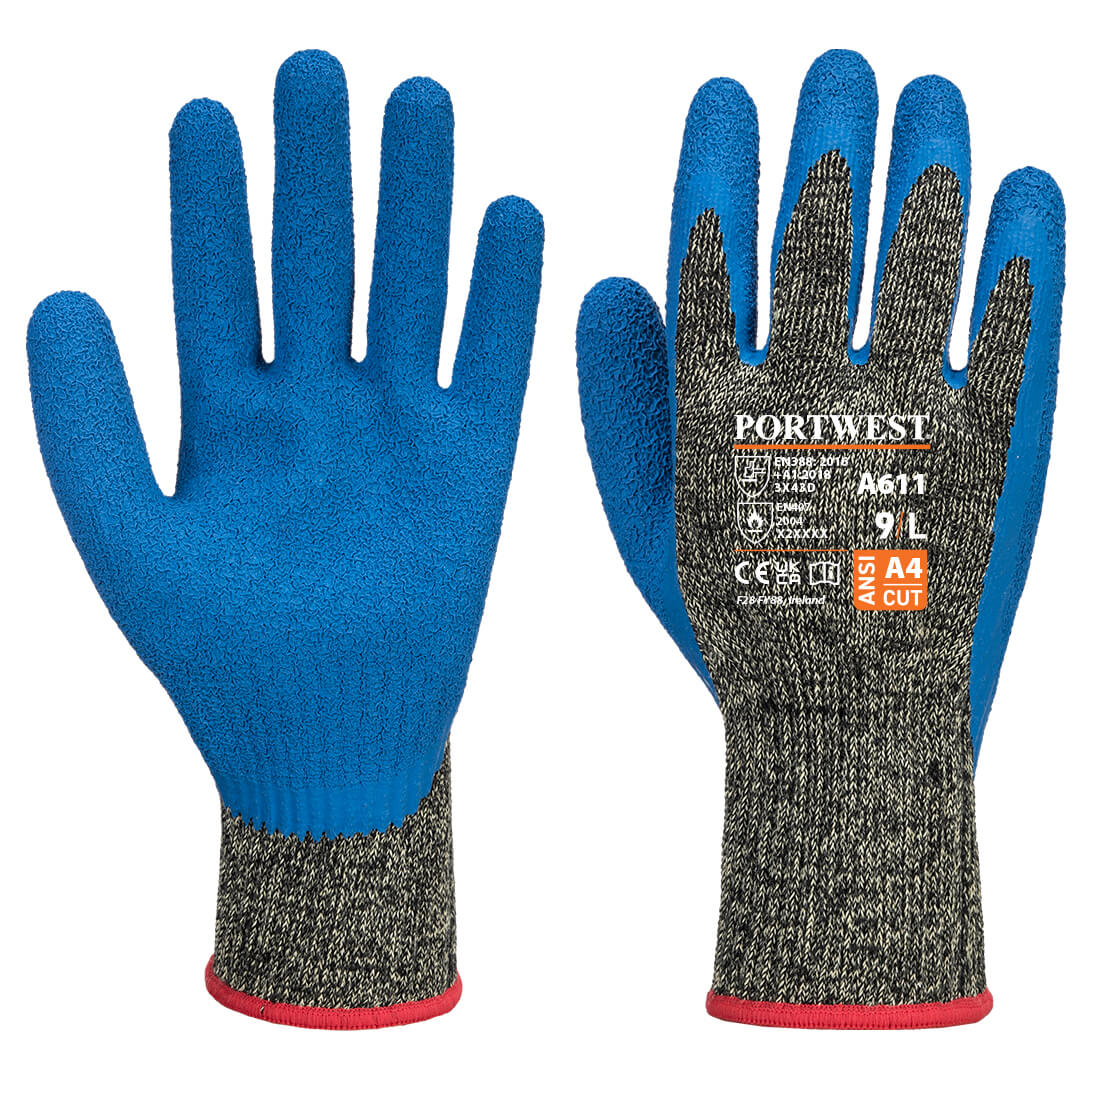 A611 Portwest® Aramid HR A4 Cut Resistant Seamless Knit Latex Coated Work Gloves